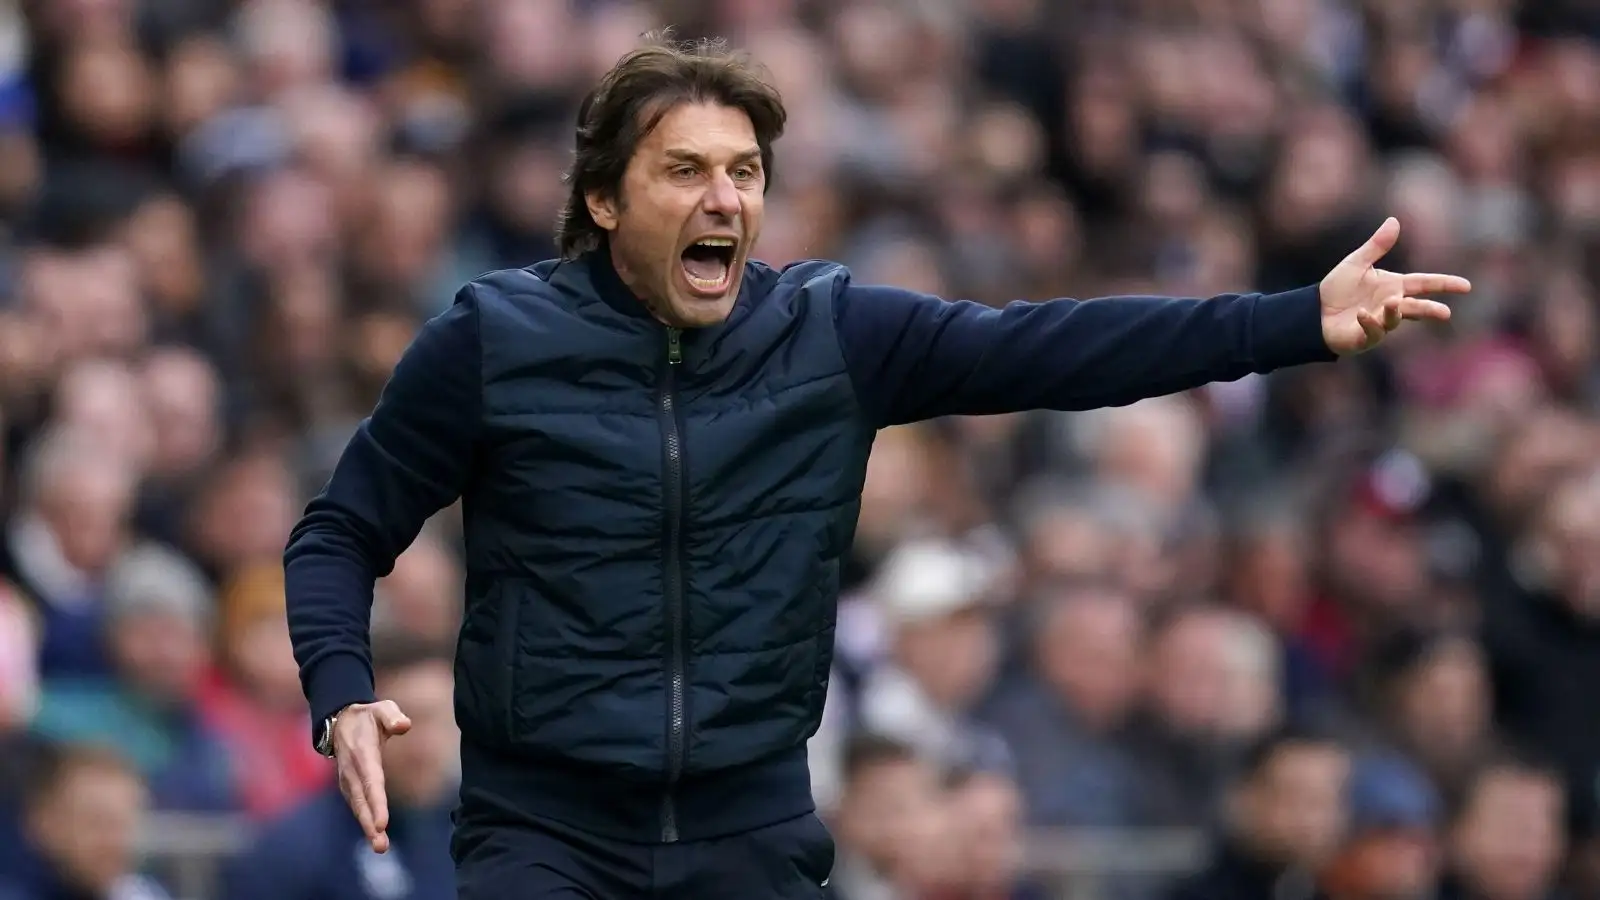 Chelsea target Antonio Conte shouts at his players